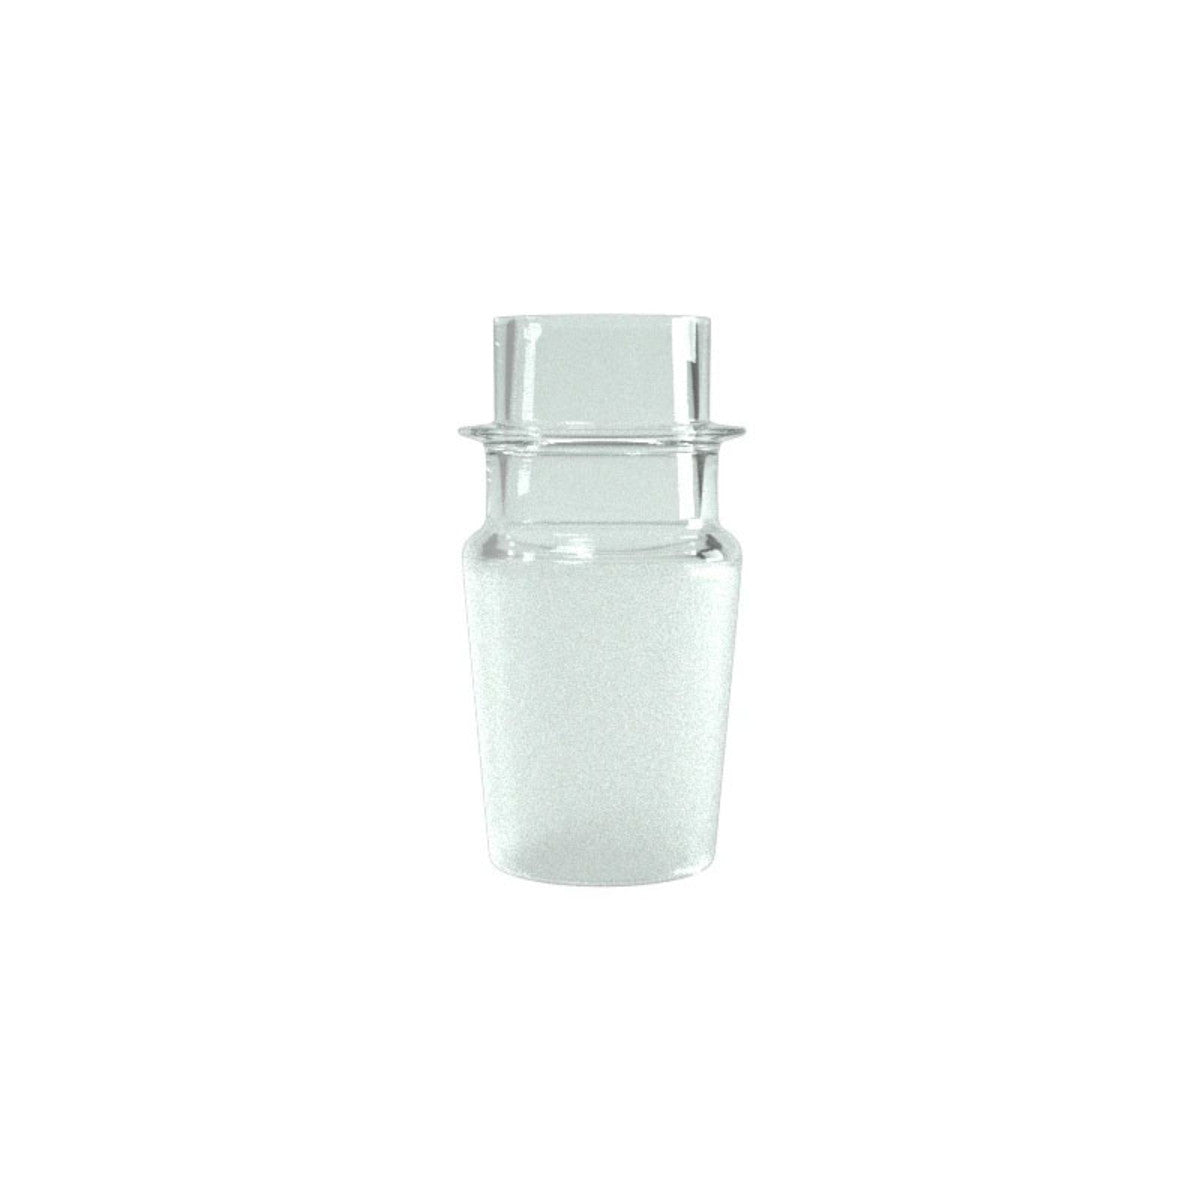 GRENCO G PEN CONNECT GLASS ADAPTER - MALE and FEMALE